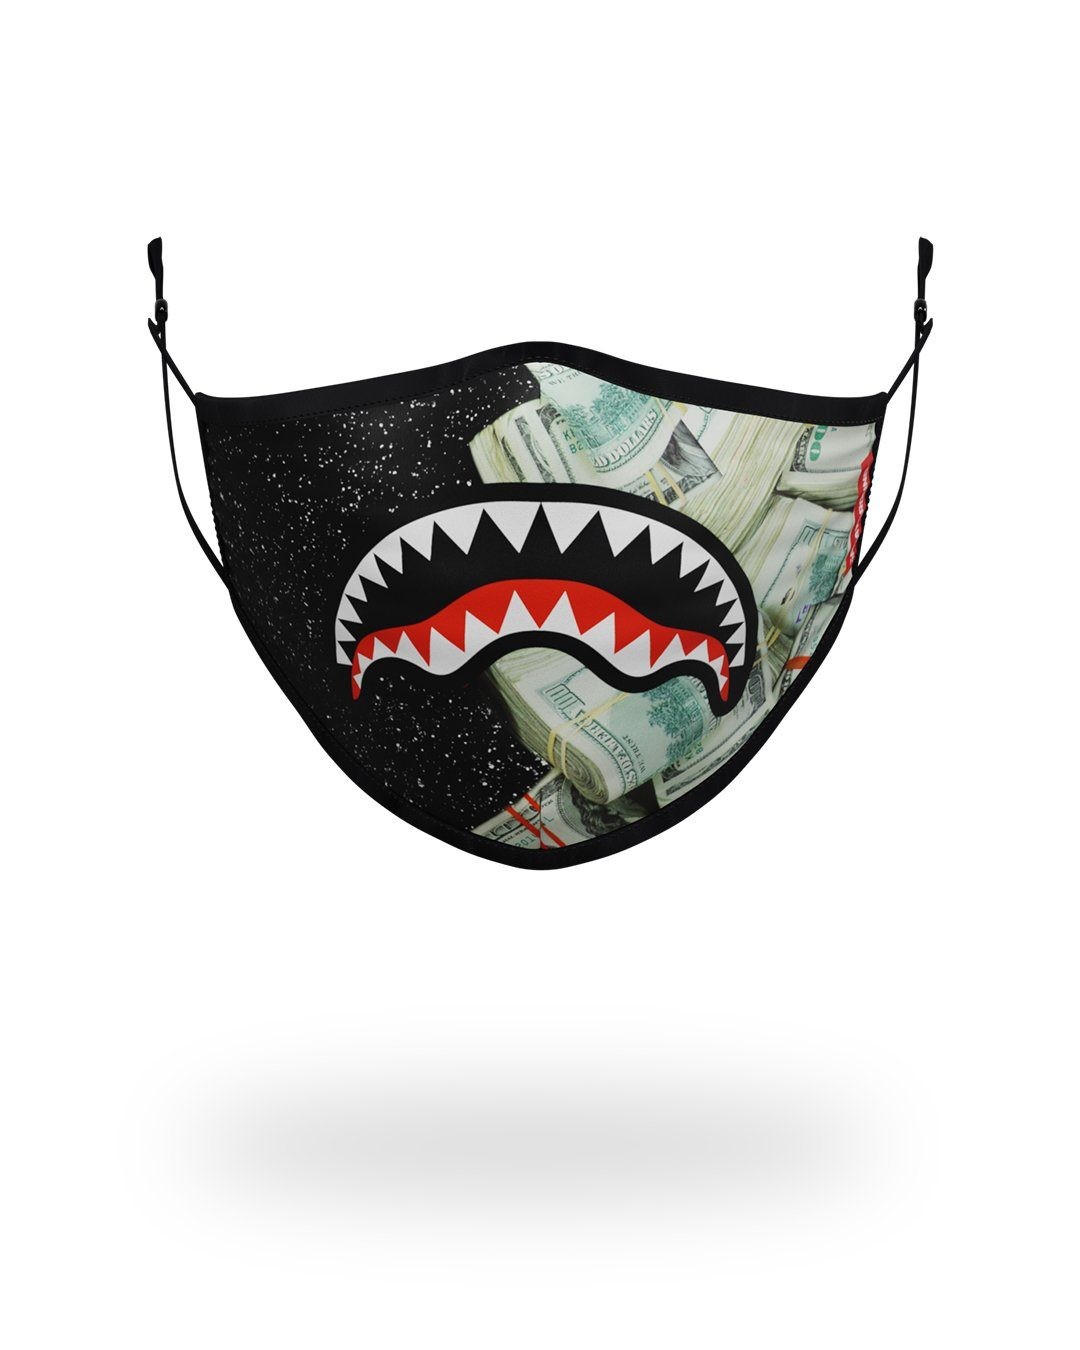 HOT SALE ☆☆☆ ADULT PARTY SHARK FORM FITTING FACE MASK - HOT SALE ☆☆☆ ADULT PARTY SHARK FORM FITTING FACE MASK-01-0